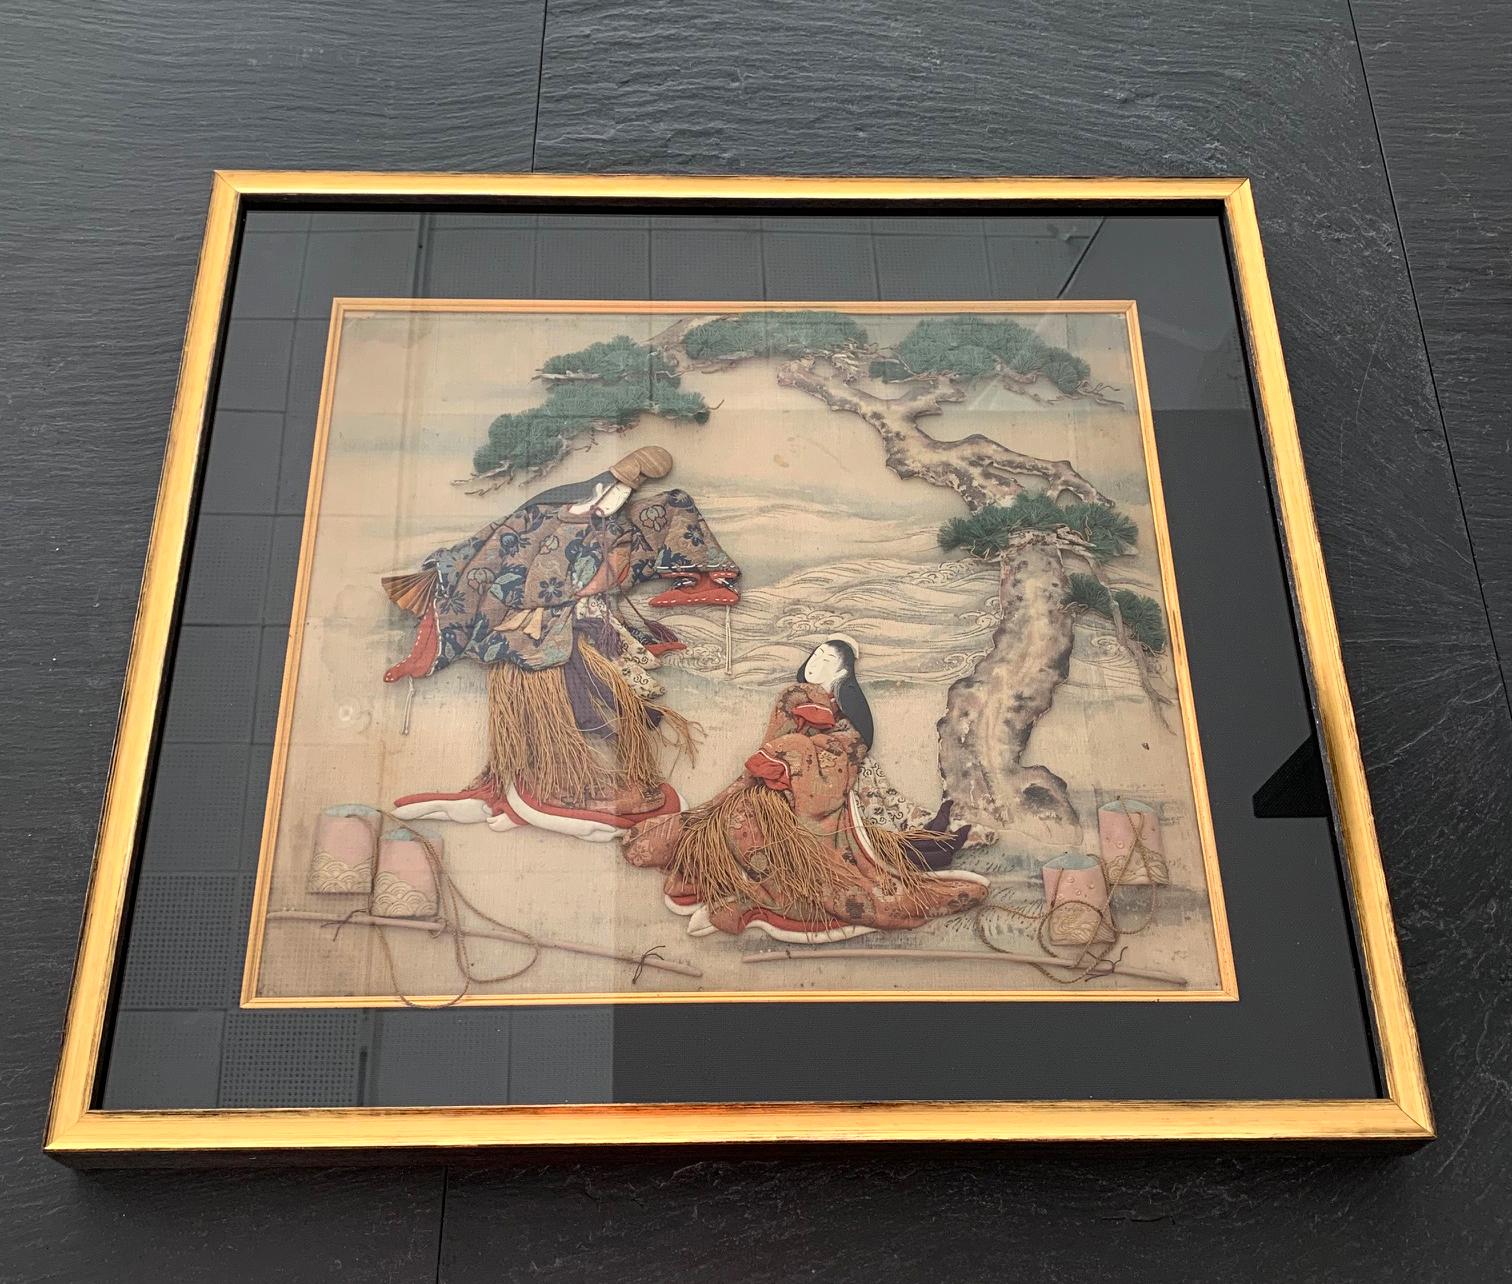 A relatively rare example of a textile art called Oshi-E from Meiji Period Japan (1868-1912). It depicts two court ladies in their fine attires having a picnic under a pine tree by the river. The two ladieswere sharing a leisurely moment with one